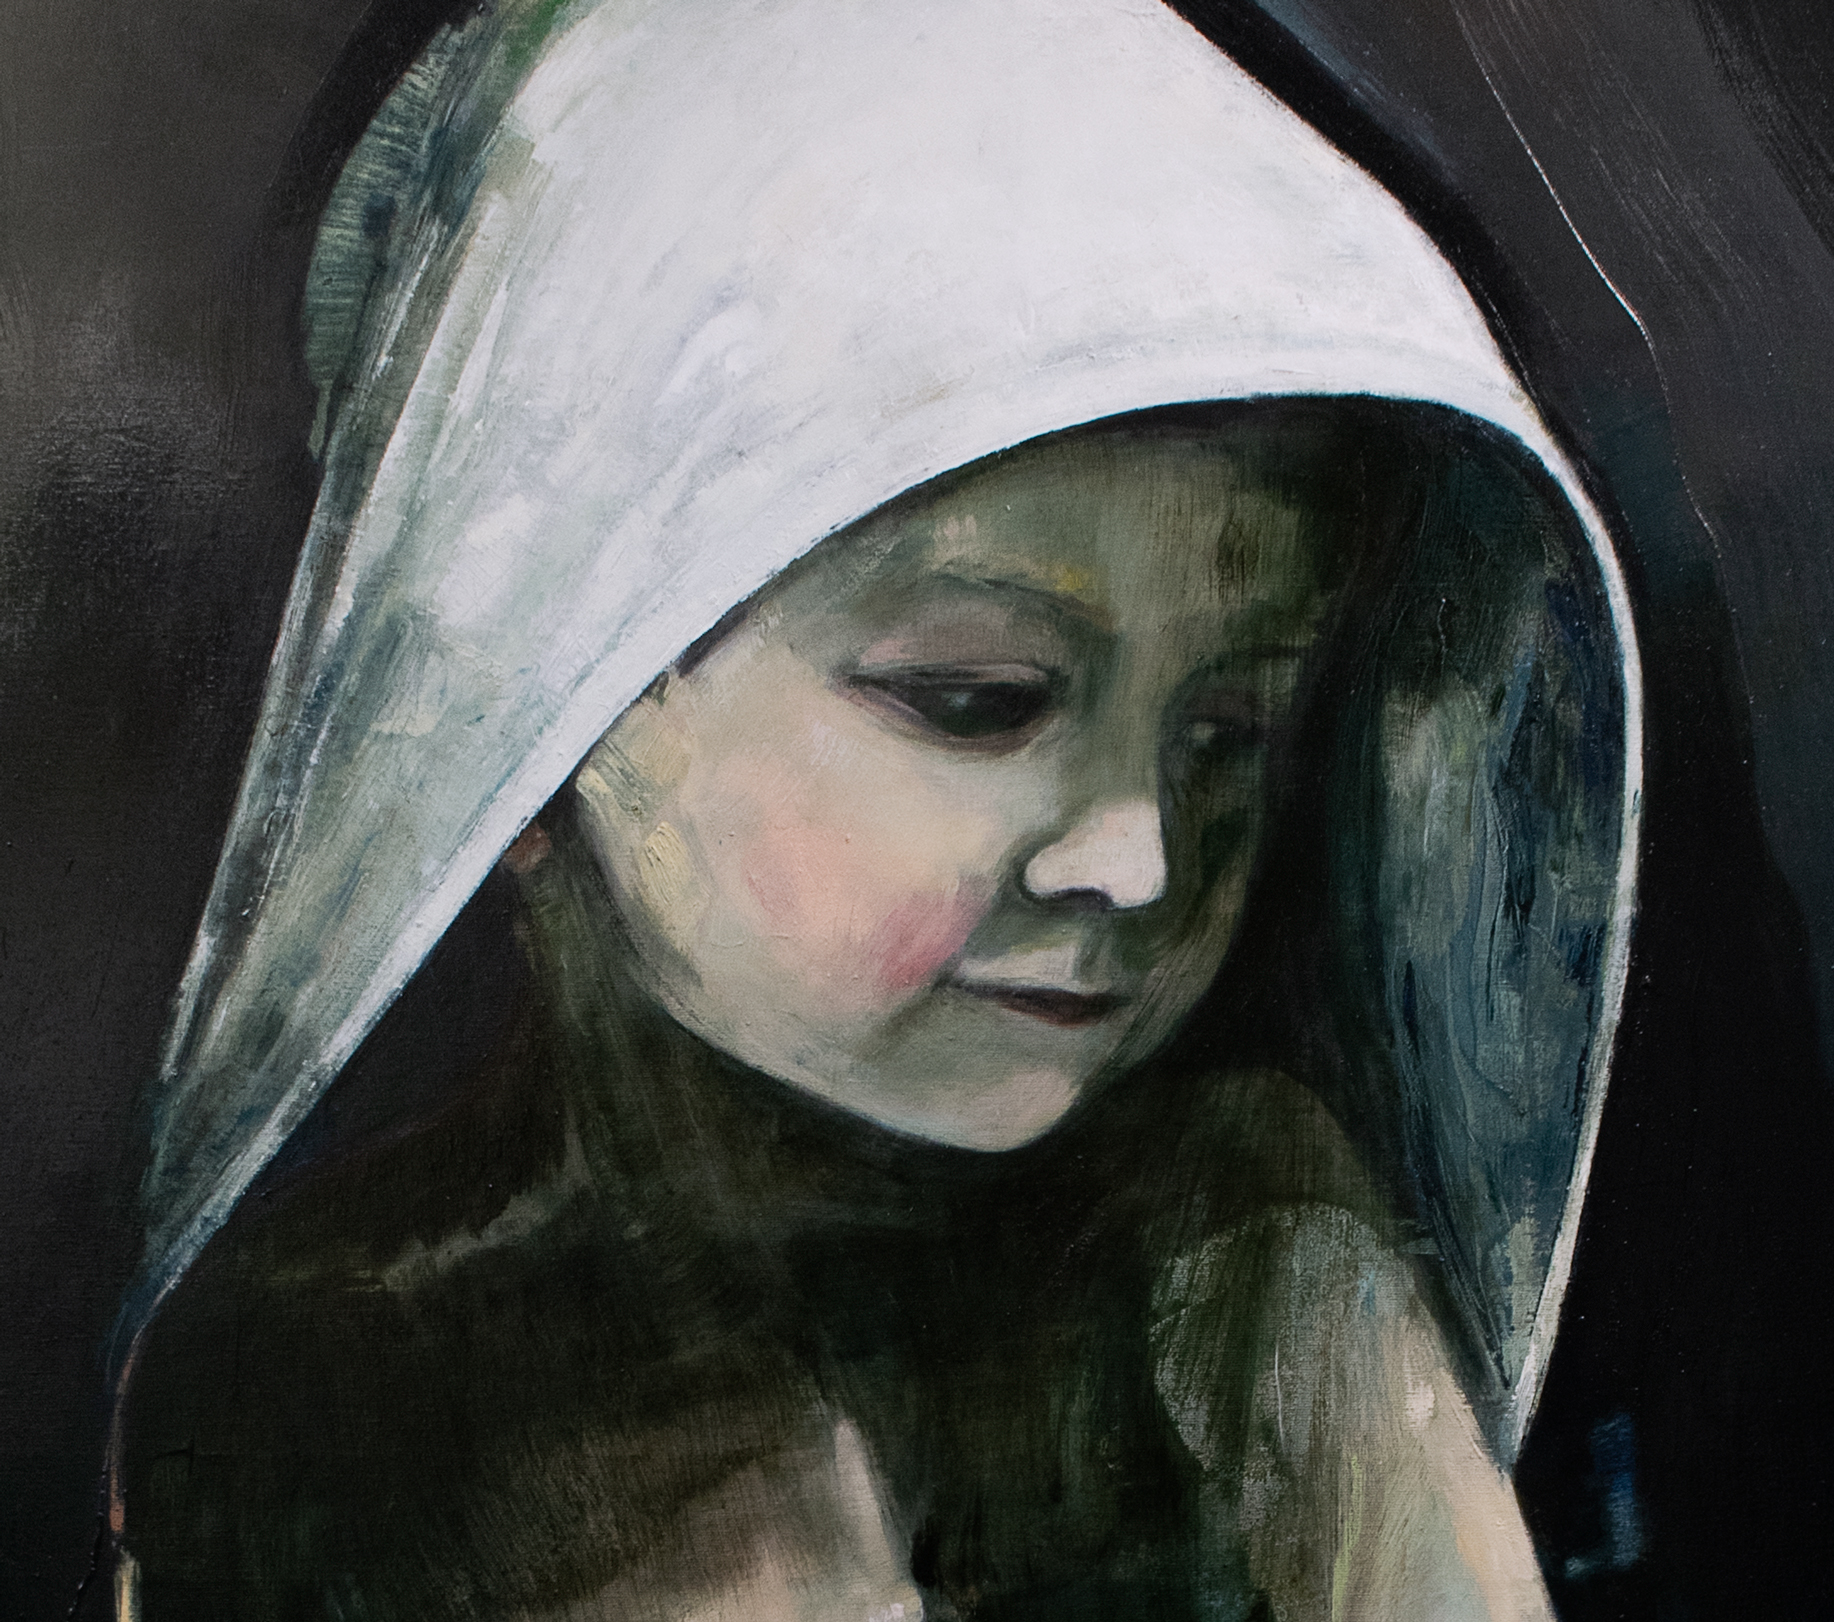 paintings, expressive, family-friendly, figurative, portraiture, bodies, children, everyday life, moods, people, textiles, beige, black, blue, white, acrylic, charcoal, cotton-canvas, oil, baby, beautiful, black-and-white, boys, contemporary-art, copenhagen, danish, dark, faces, interior, interior-design, kids, love, modern-art, nordic, scandinavien, vivid, Buy original high quality art. Paintings, drawings, limited edition prints & posters by talented artists.